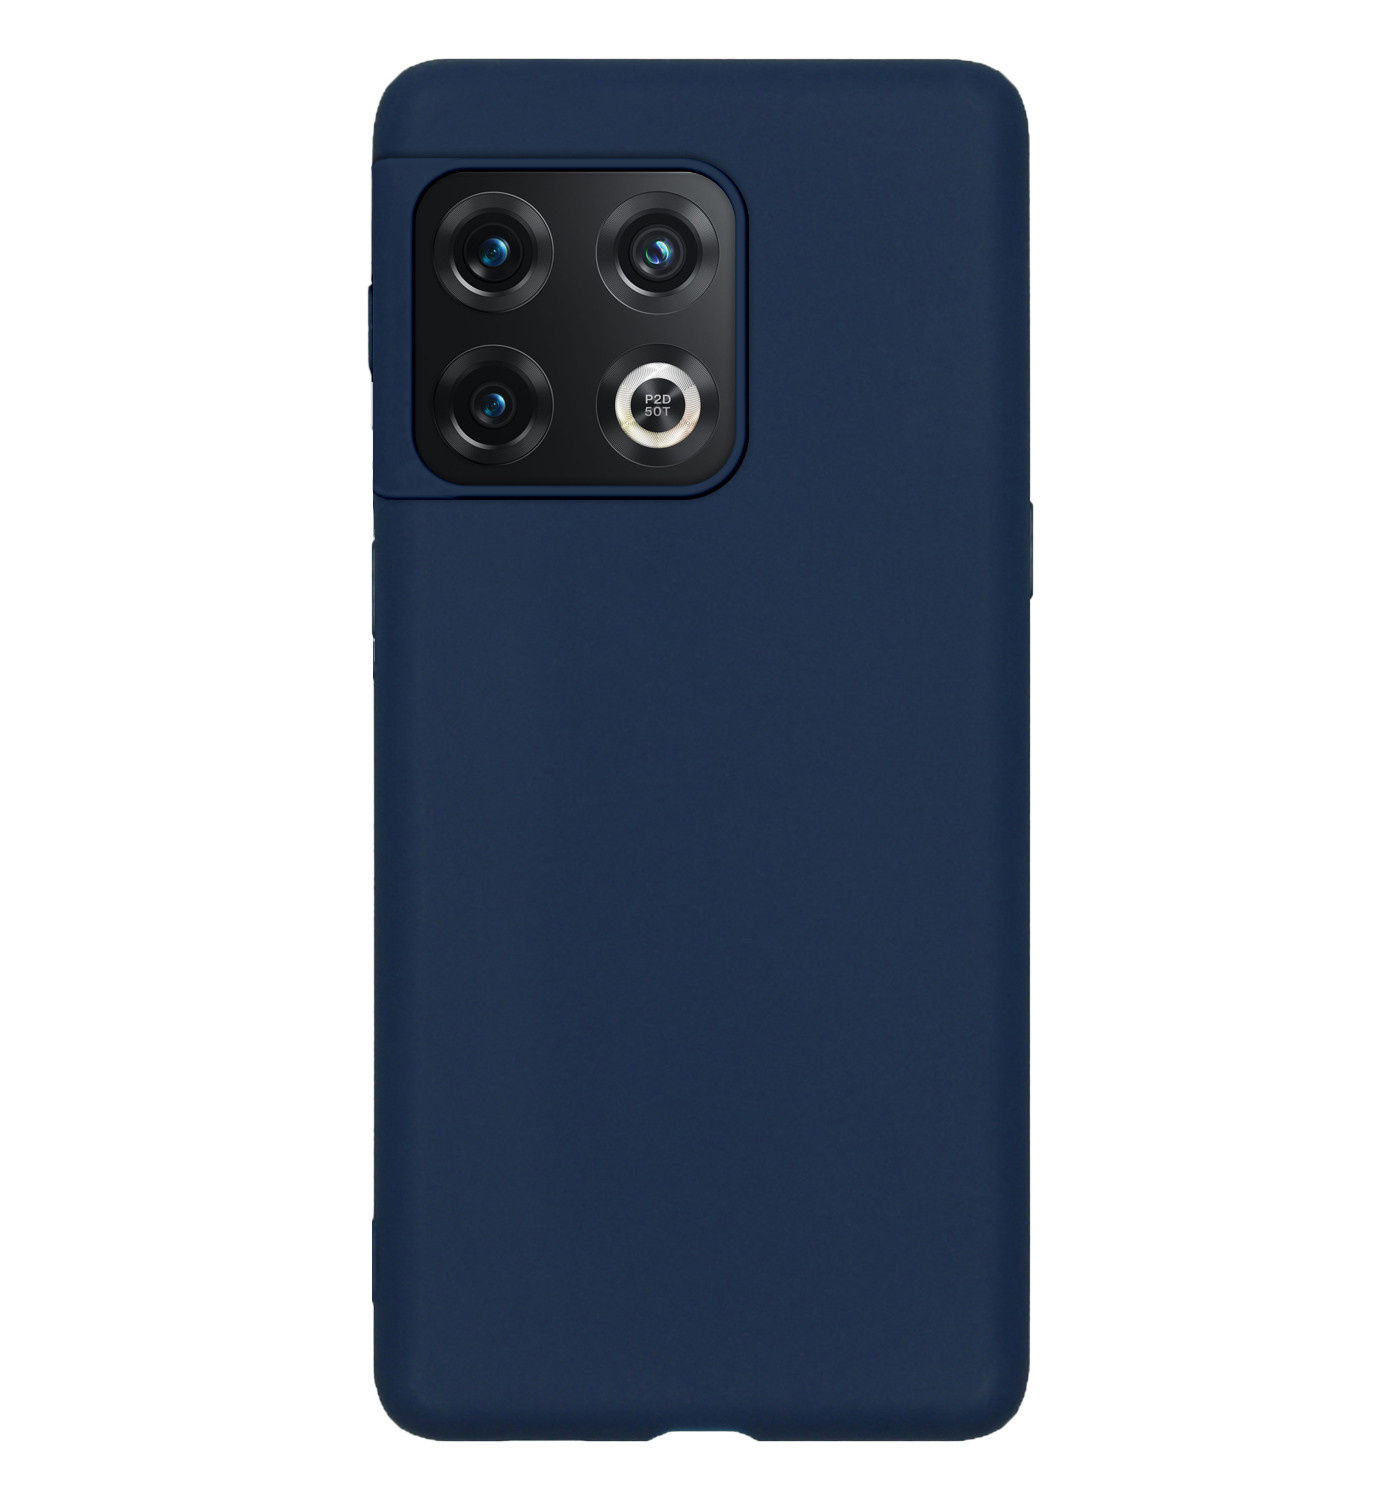 Nomfy OnePlus 10 Pro Hoesje Siliconen - OnePlus 10 Pro Hoesje Donker Blauw Case - OnePlus 10 Pro Cover Siliconen Back Cover -Donker Blauw